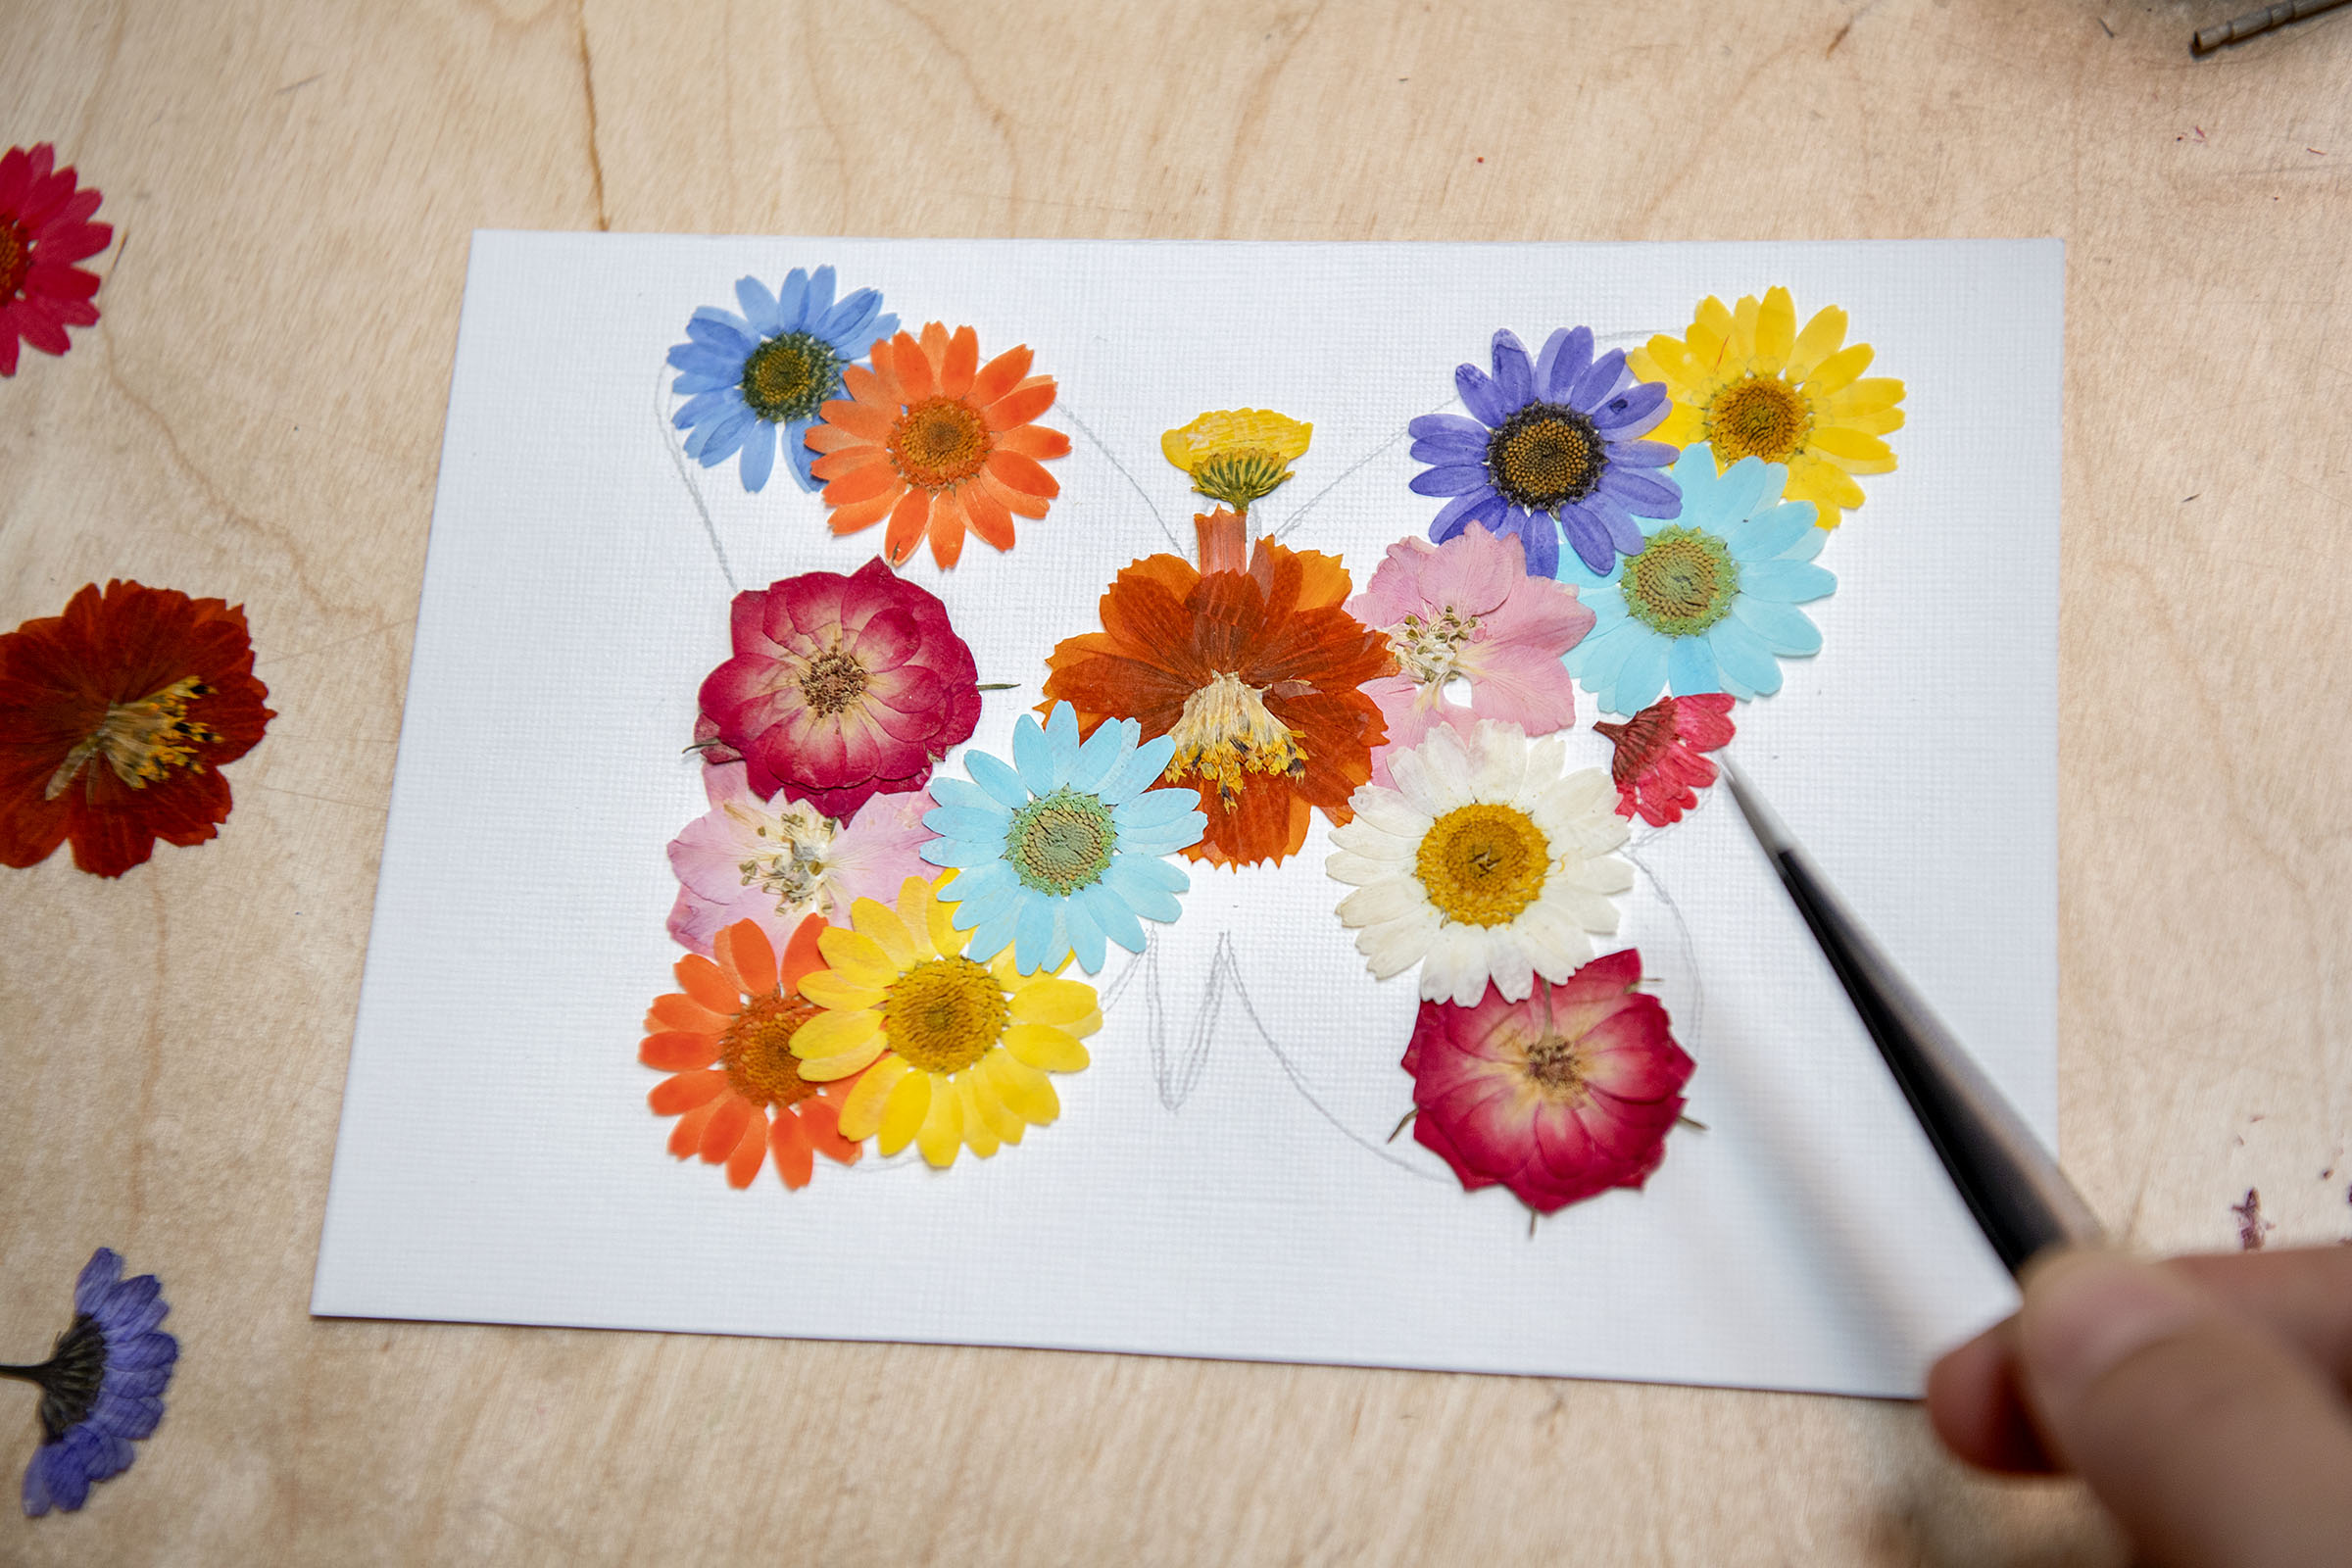 How To Make a Pressed Flower Art Business